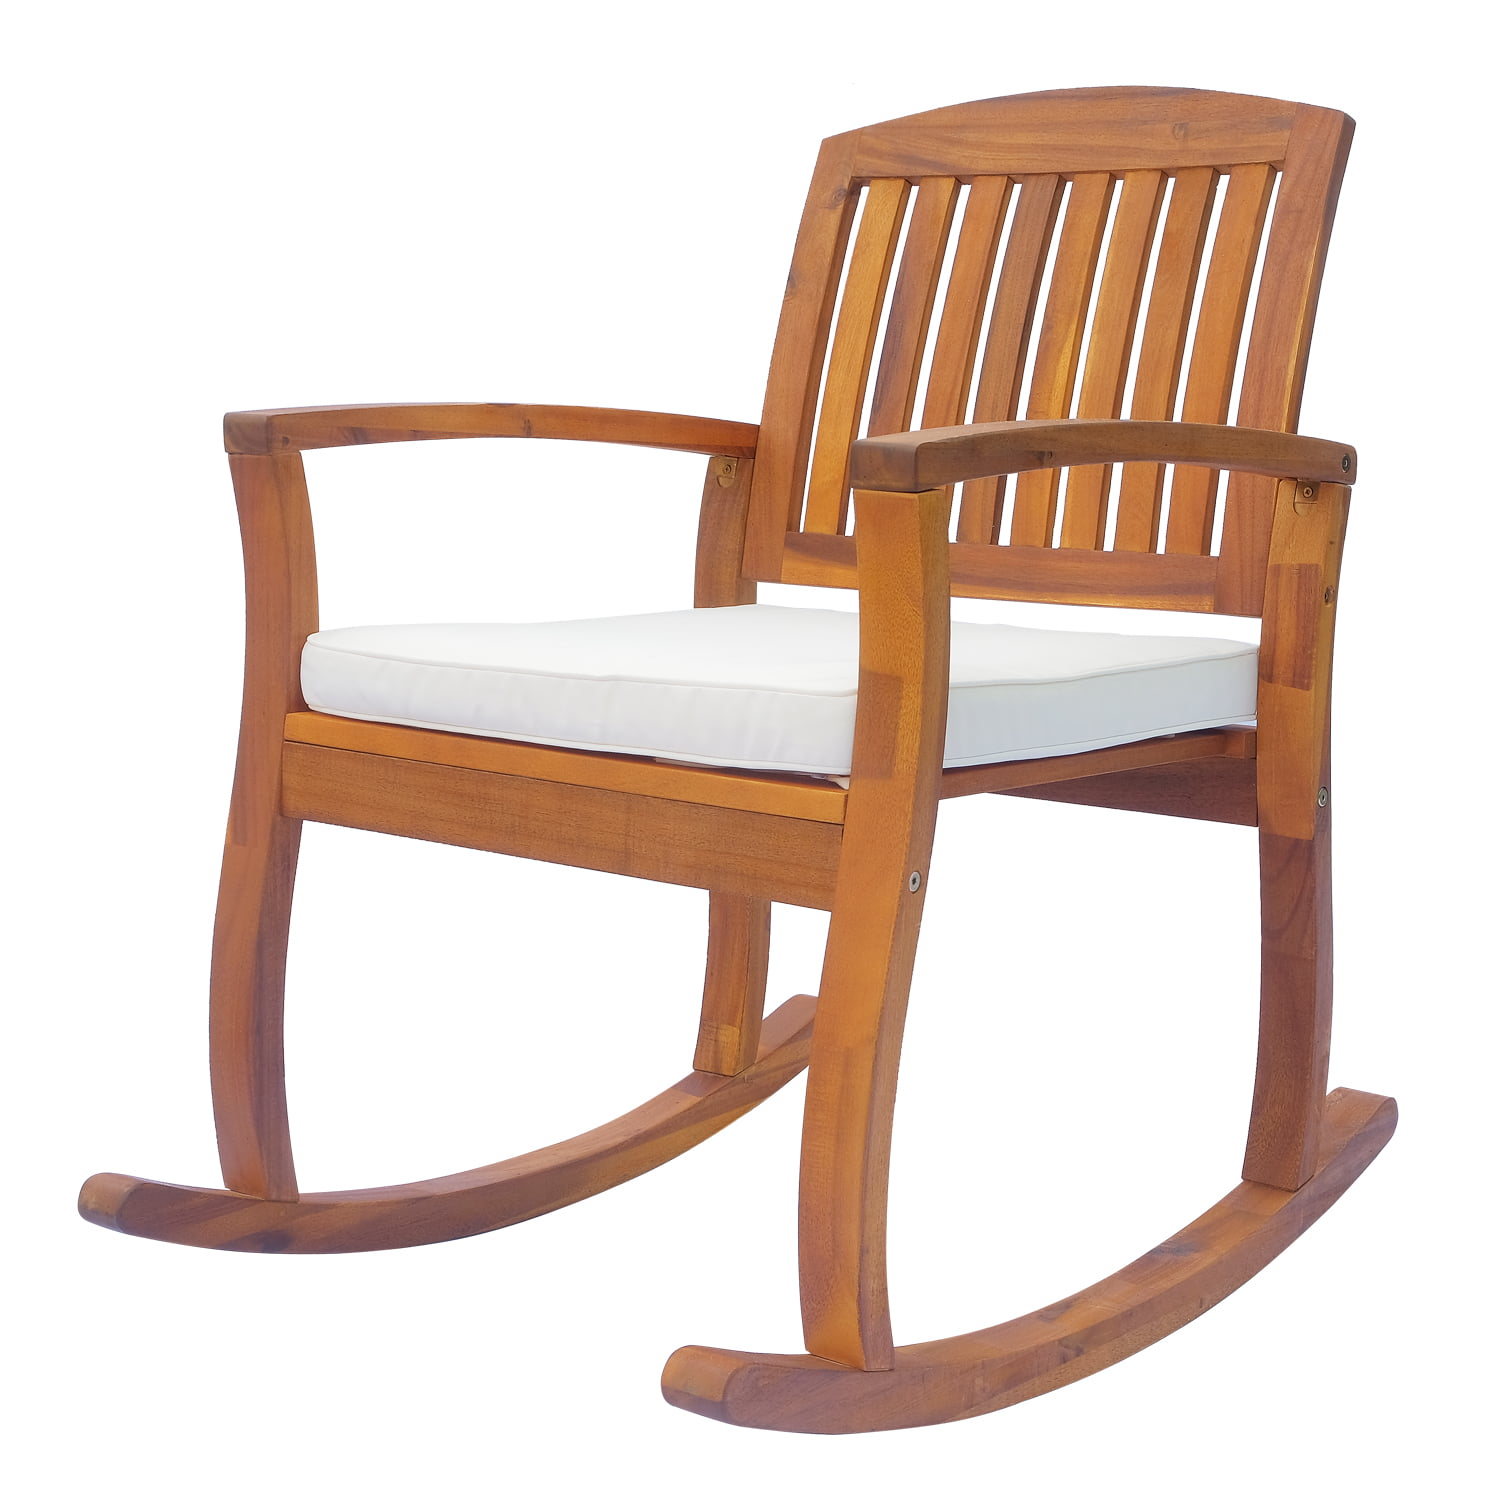 Outsunny Outdoor Patio Acacia Wood Rocking Chair with Cushioned Seat -
White - Walmart.com